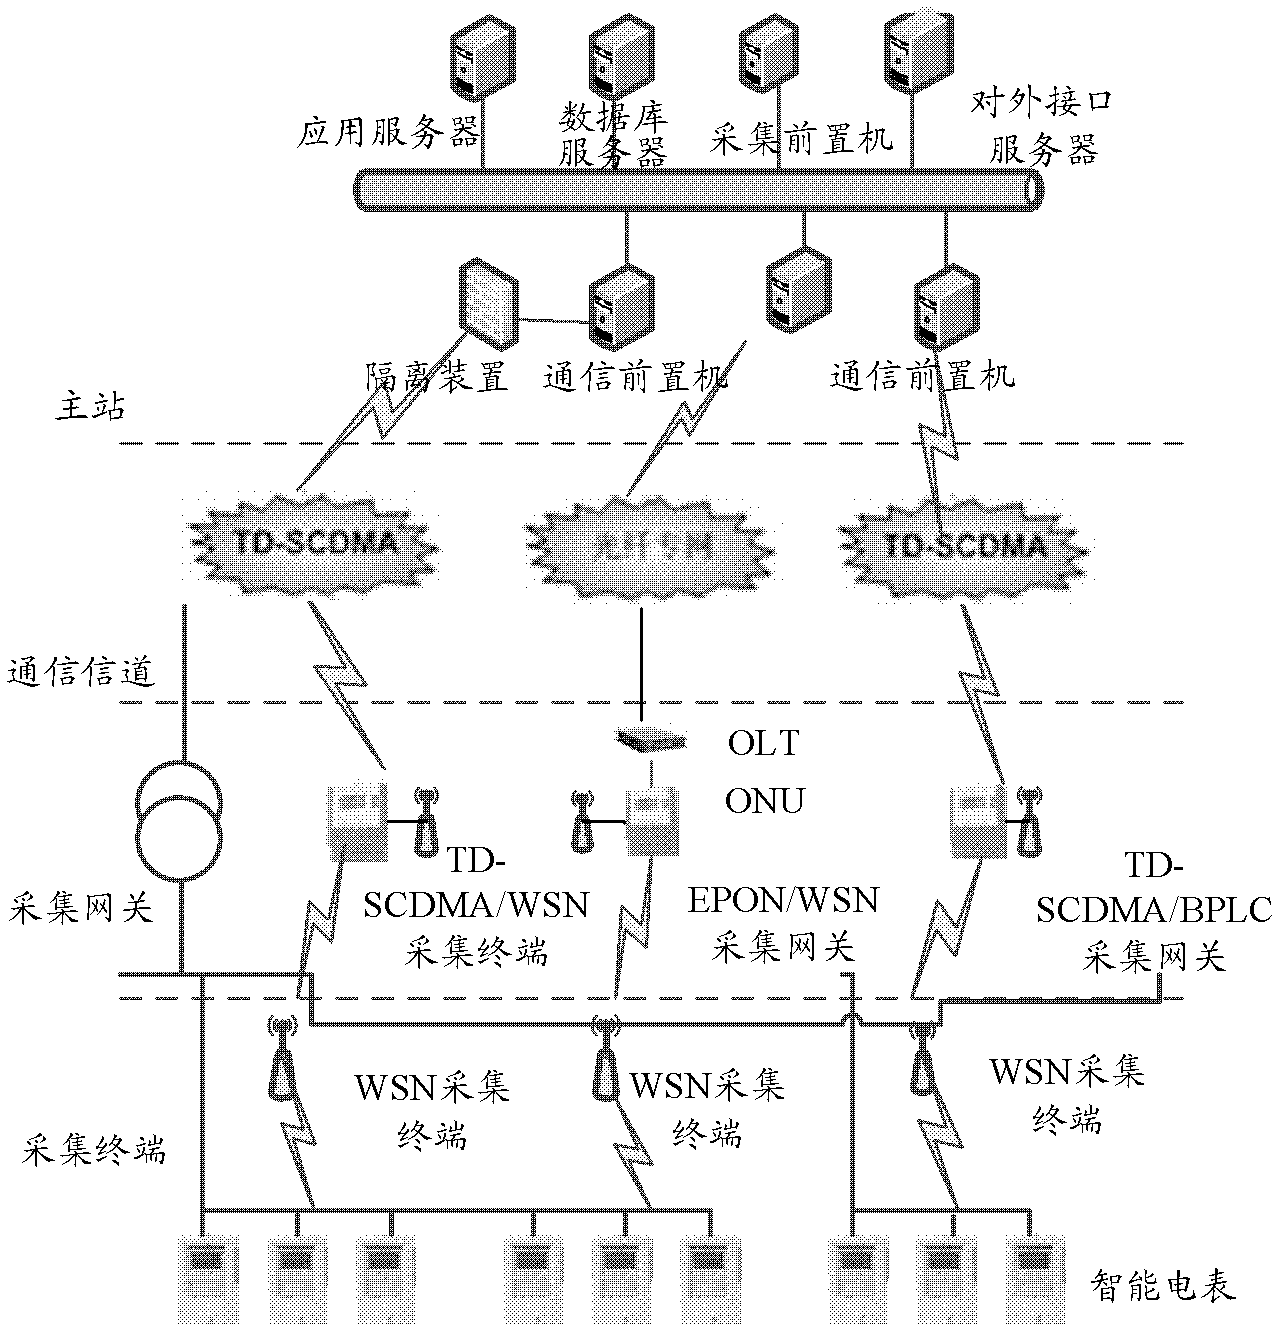 A system and method for collecting electricity consumption information